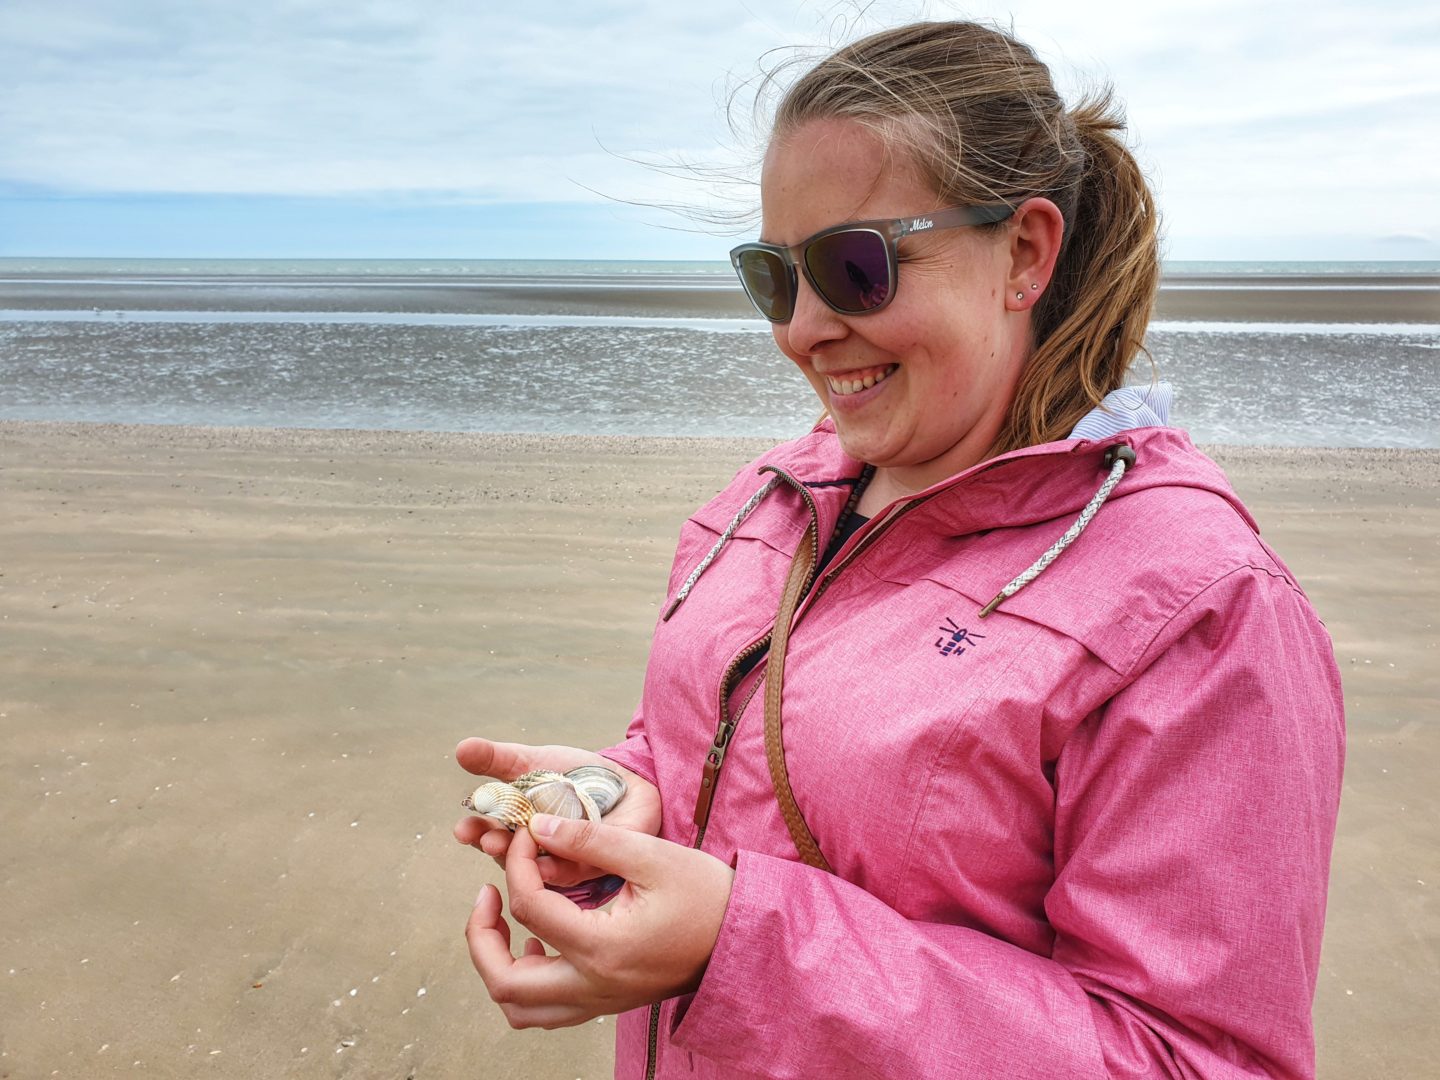 Visiting Camber Sands and collecting shells